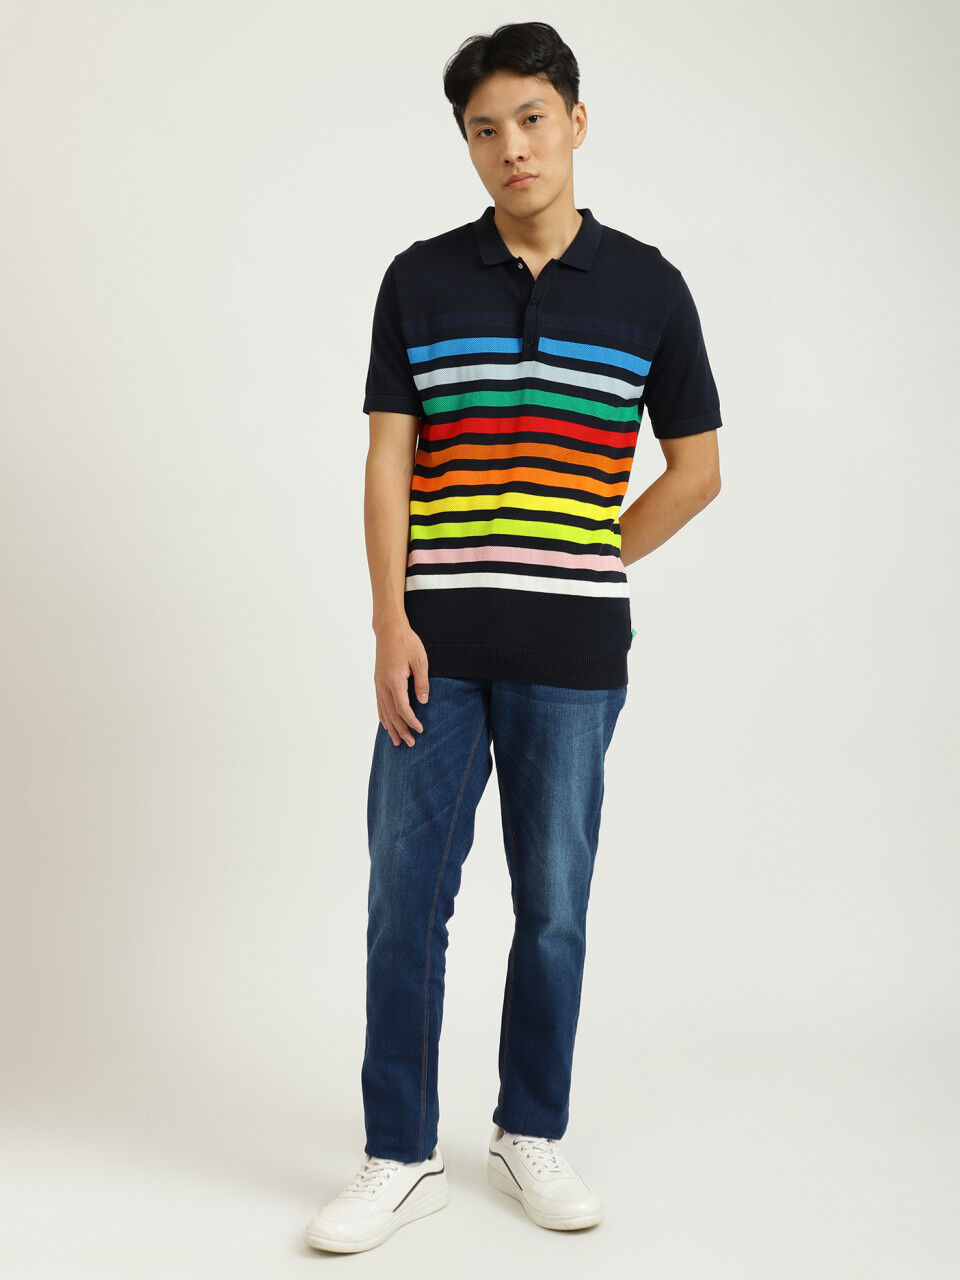 United Colors Of Benetton Black Striped Polo T-Shirt